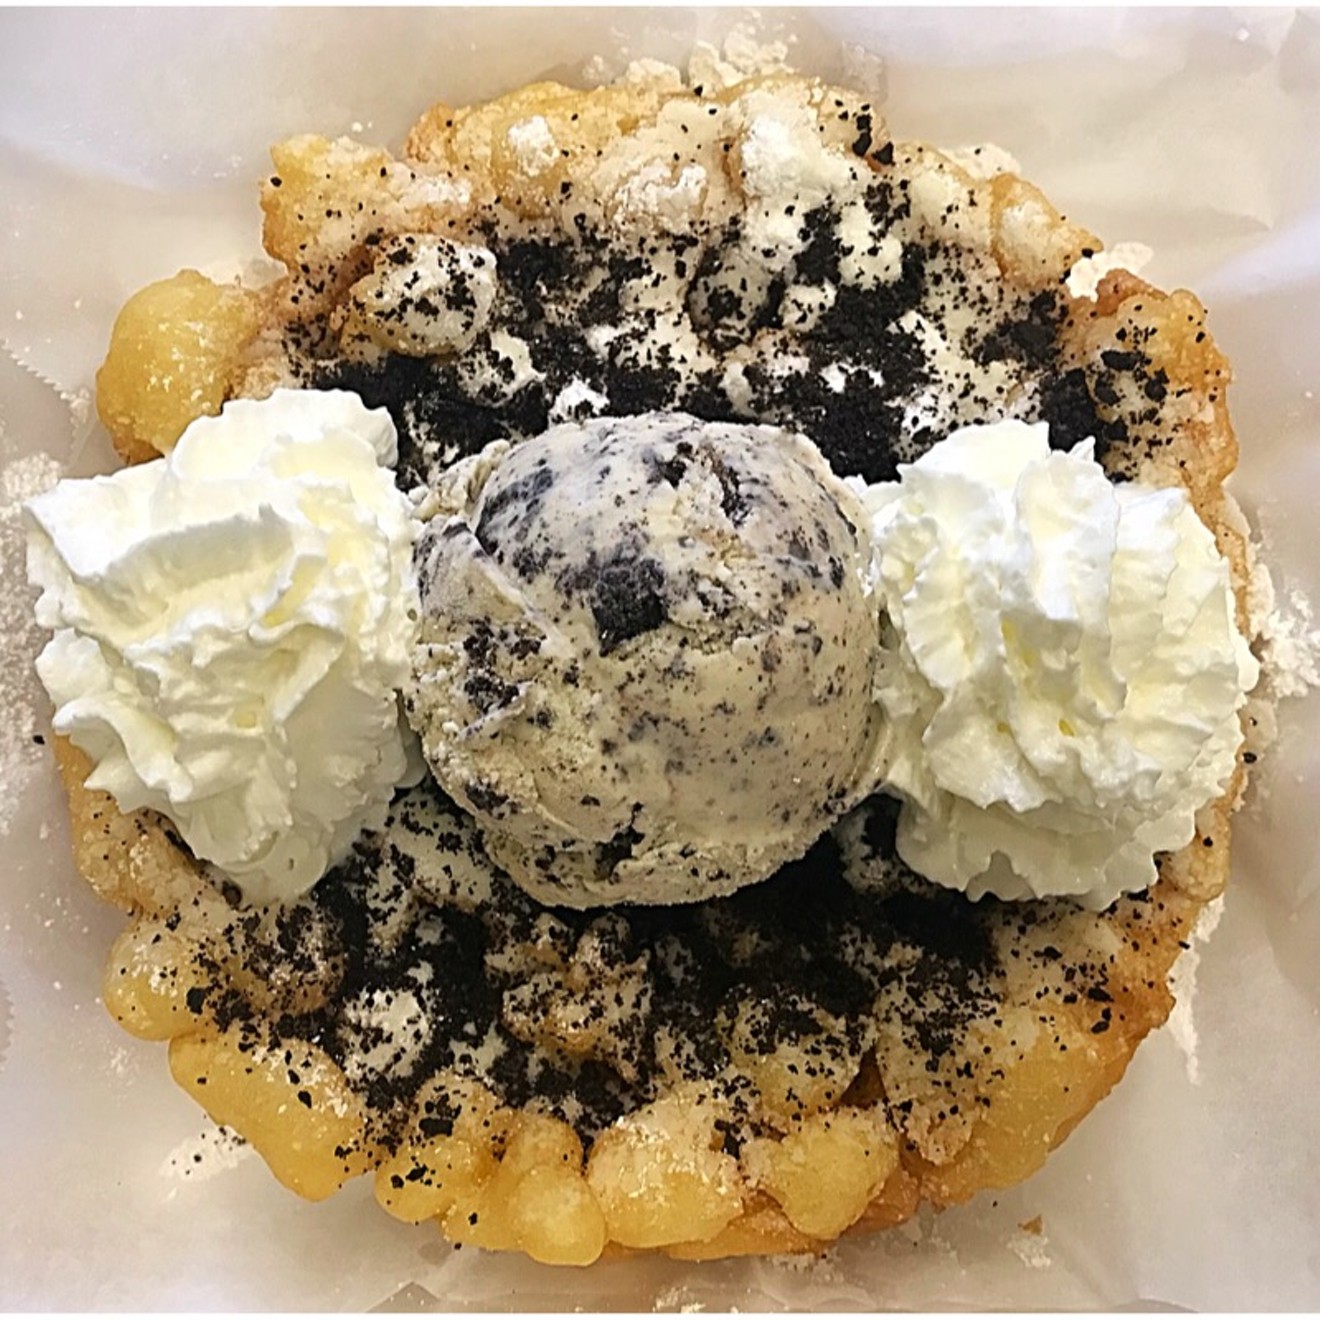 The Oreo funnel cake is one of the most popular orders at Funnel Cake Paradise.